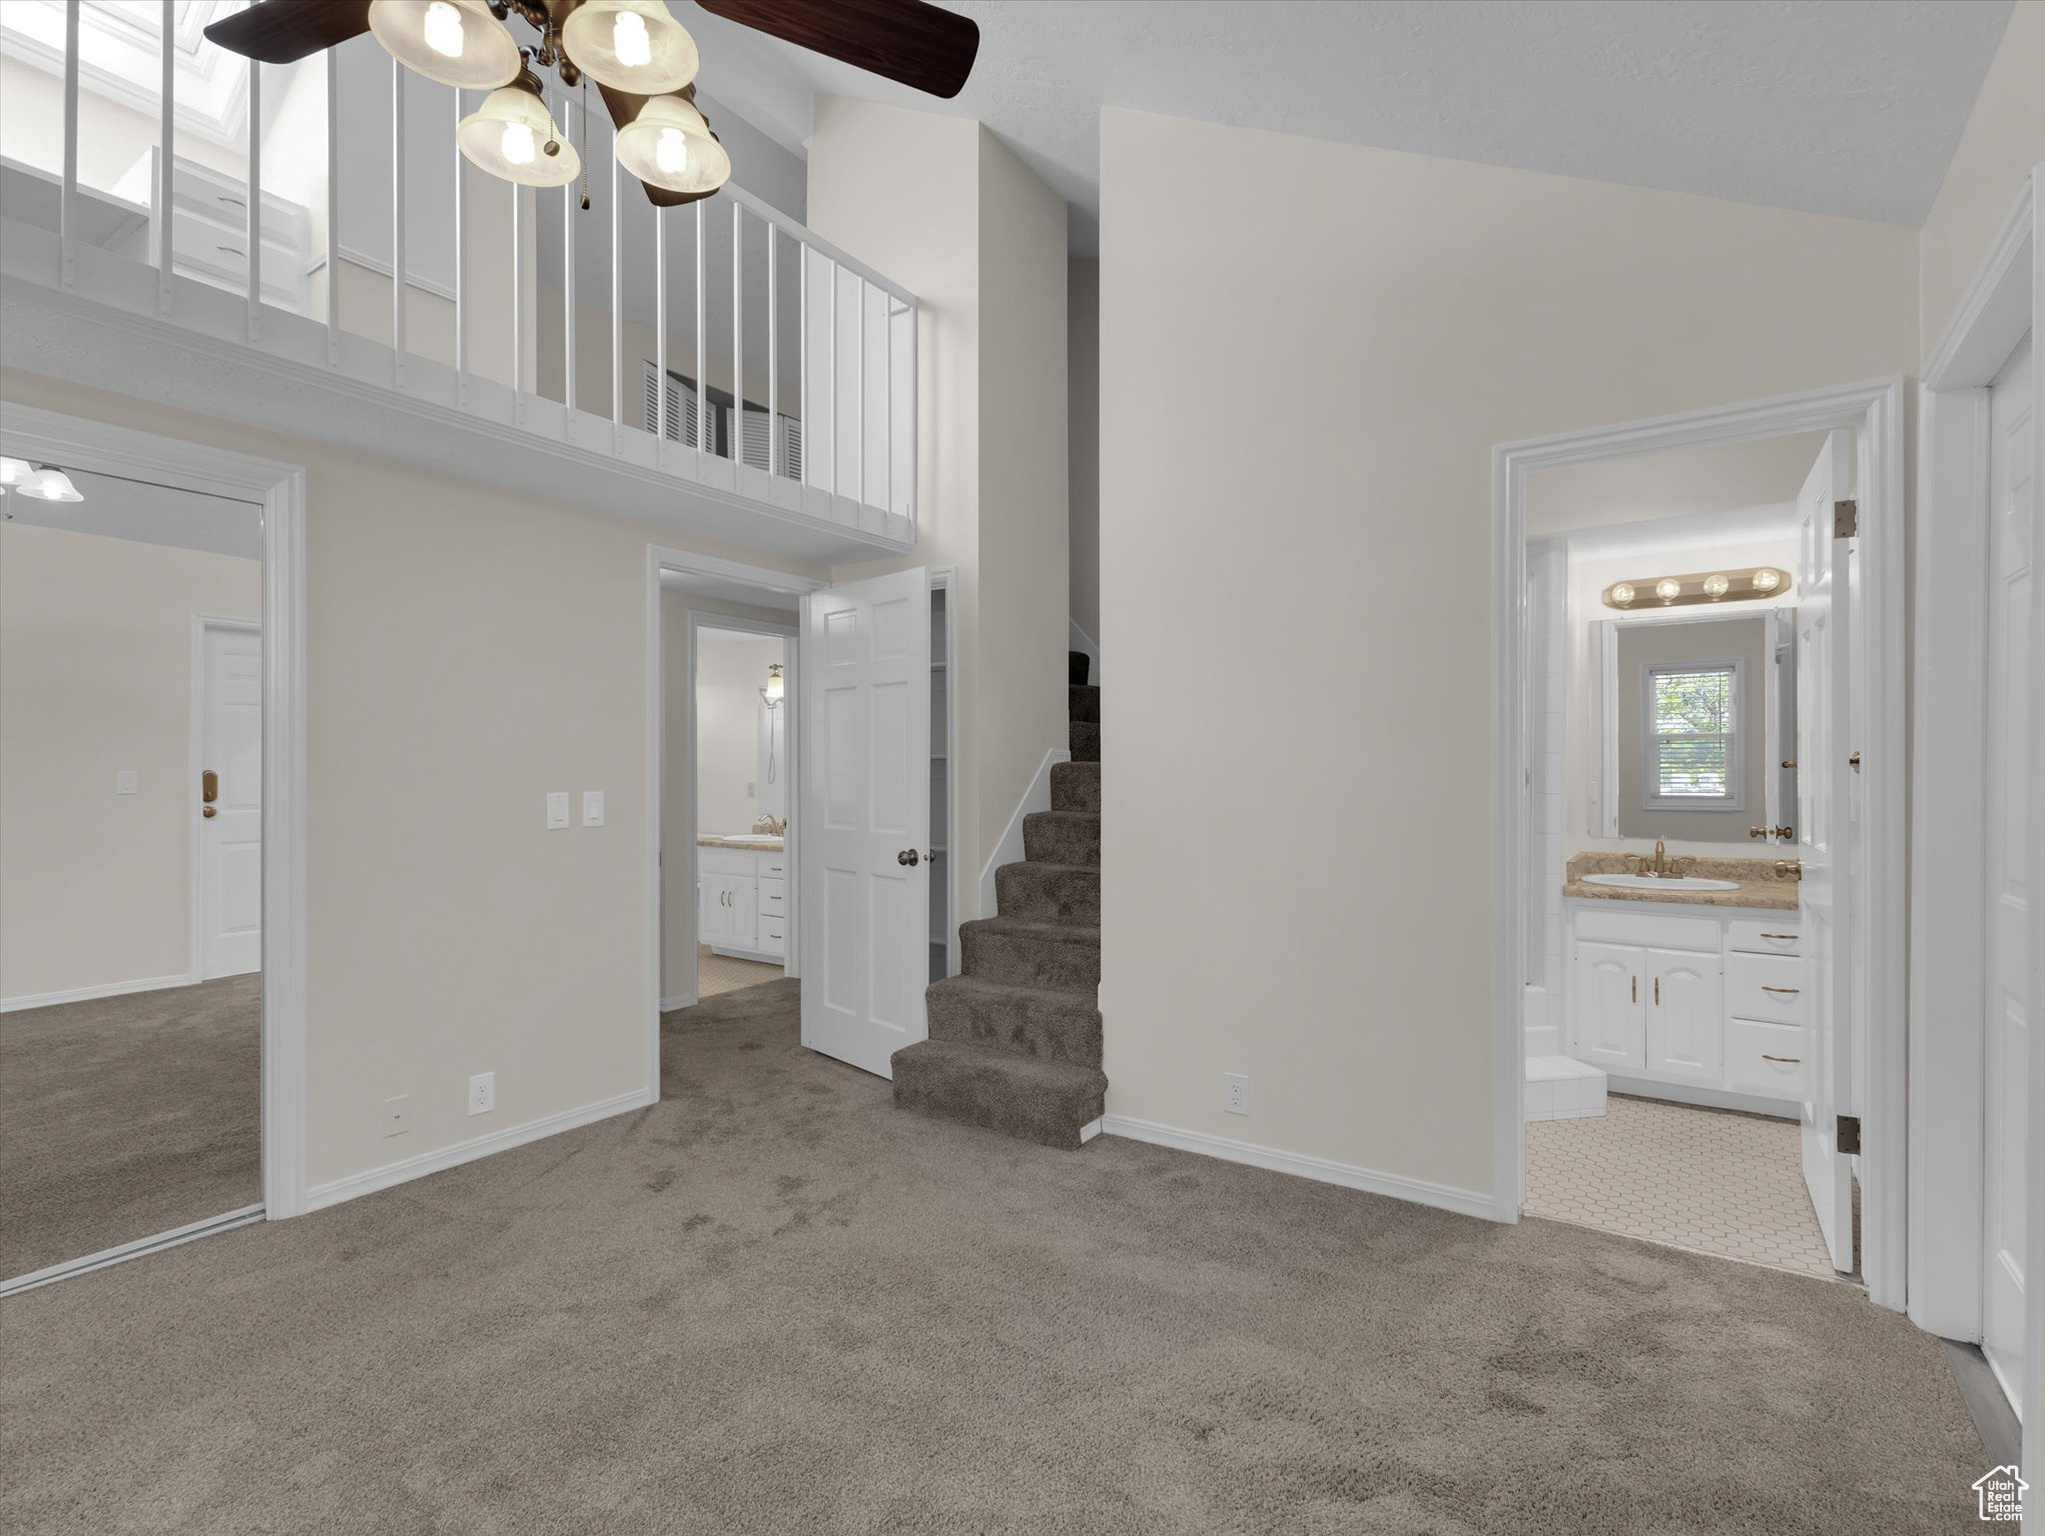 Interior space featuring high vaulted ceiling, ensuite bathroom, sink, light colored carpet, and ceiling fan